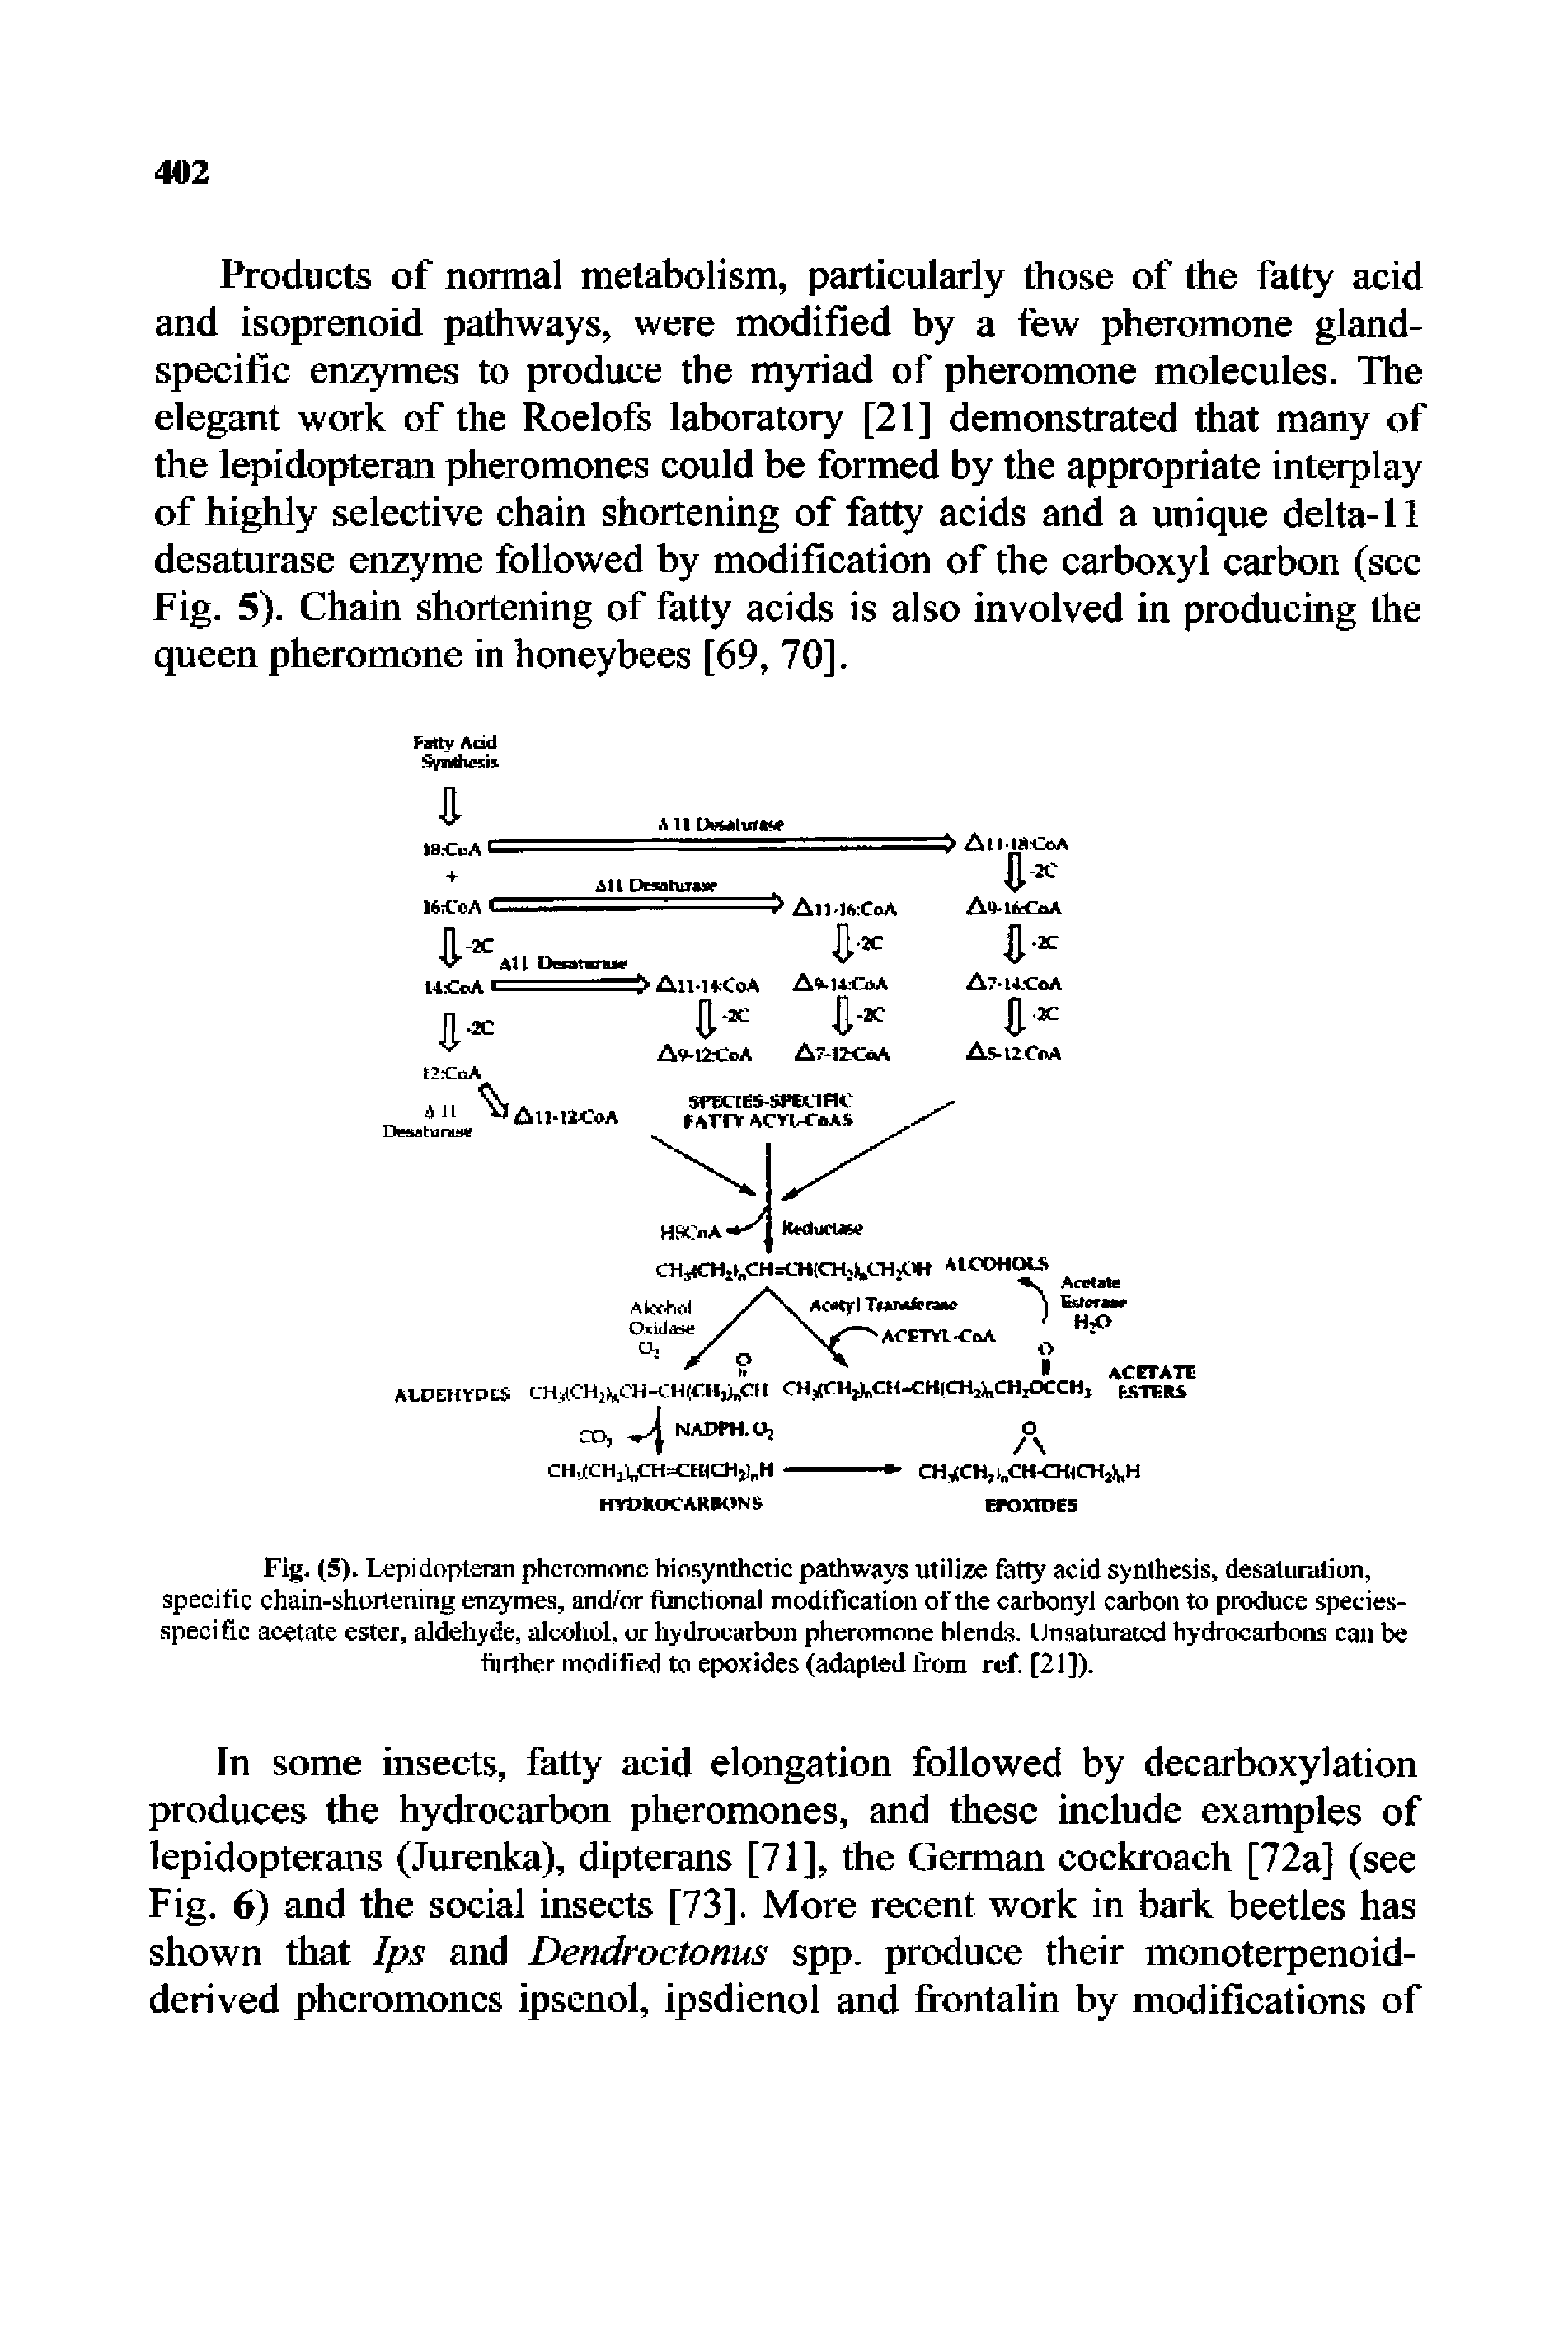 Fig. (5). Lepidopteran pheromone biosynthetic pathways utilize fatty acid synthesis, desatiindiun, specific chain-shortening enzymes, and/or functional modification of tlie carbony l carbon to produce species-apecific acetate ester, aldehyde, alcohol, or hydrocarbon pheromone blends. Unsaturated hydrocarbons can be further modified to epoxides (adapted from ref. [21]).